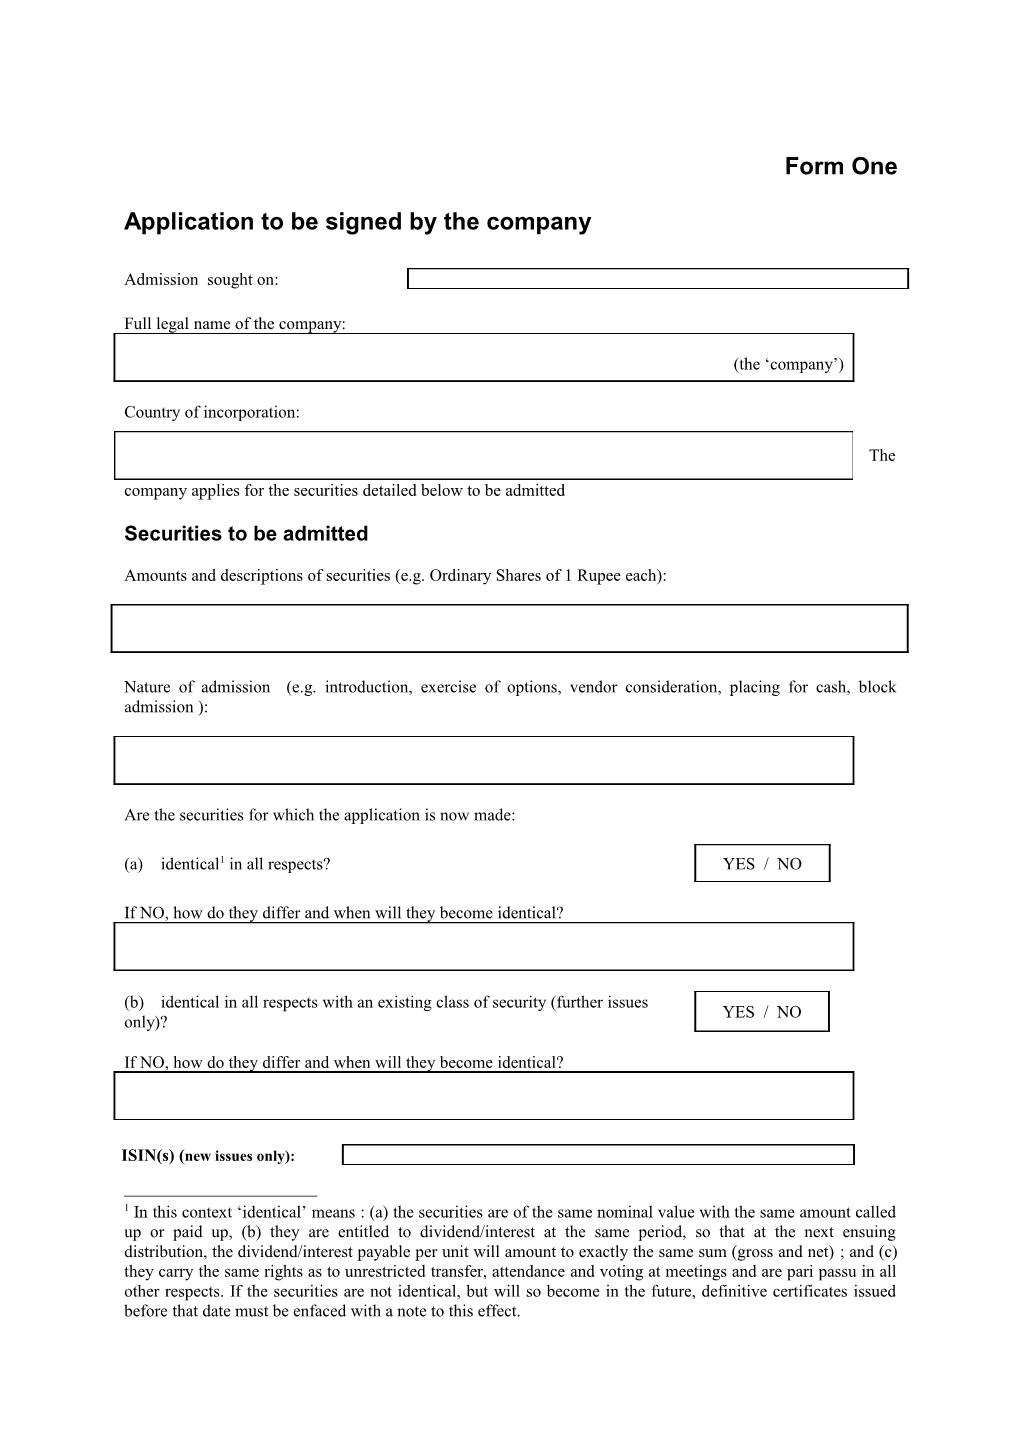 Application to Be Signed by the Company